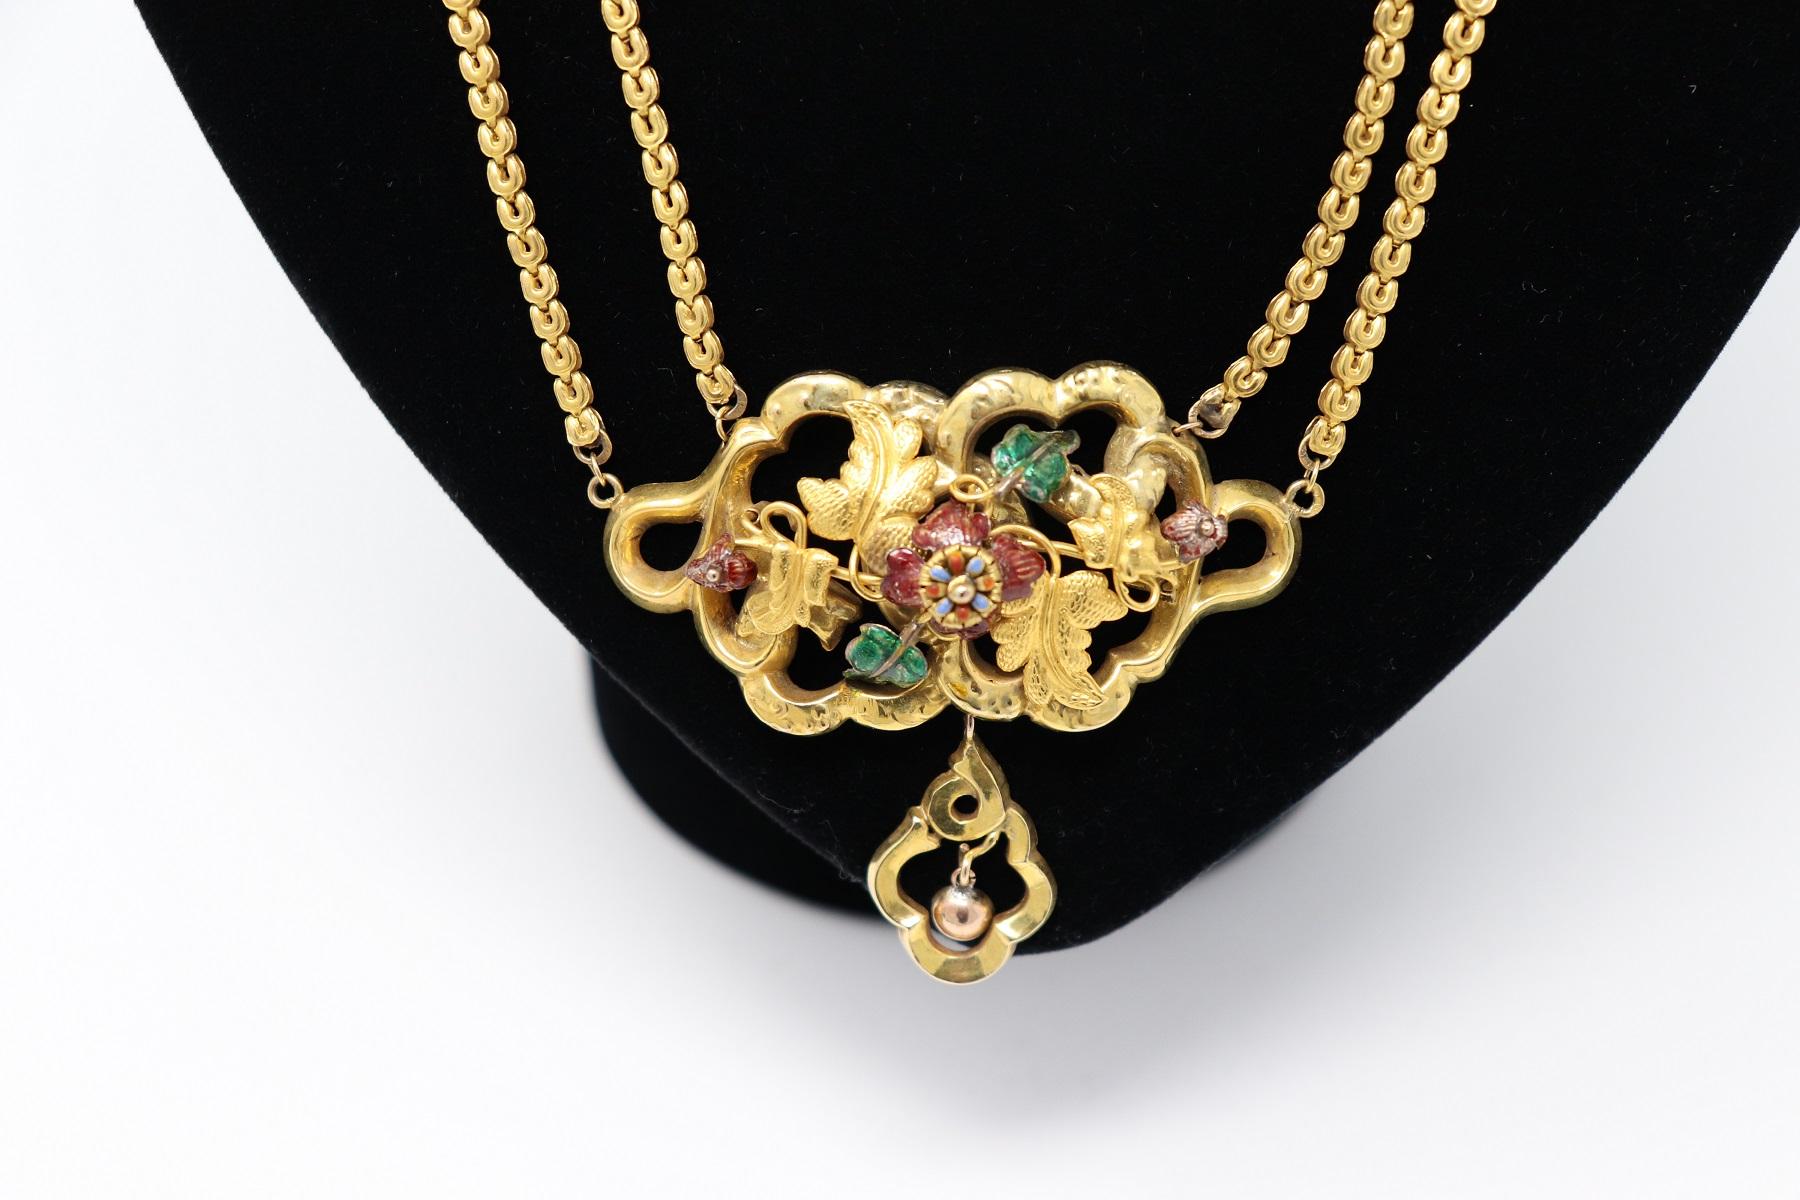 19th Century Gold Necklace with a Large Bourbon Pendant, 1850 For Sale 3